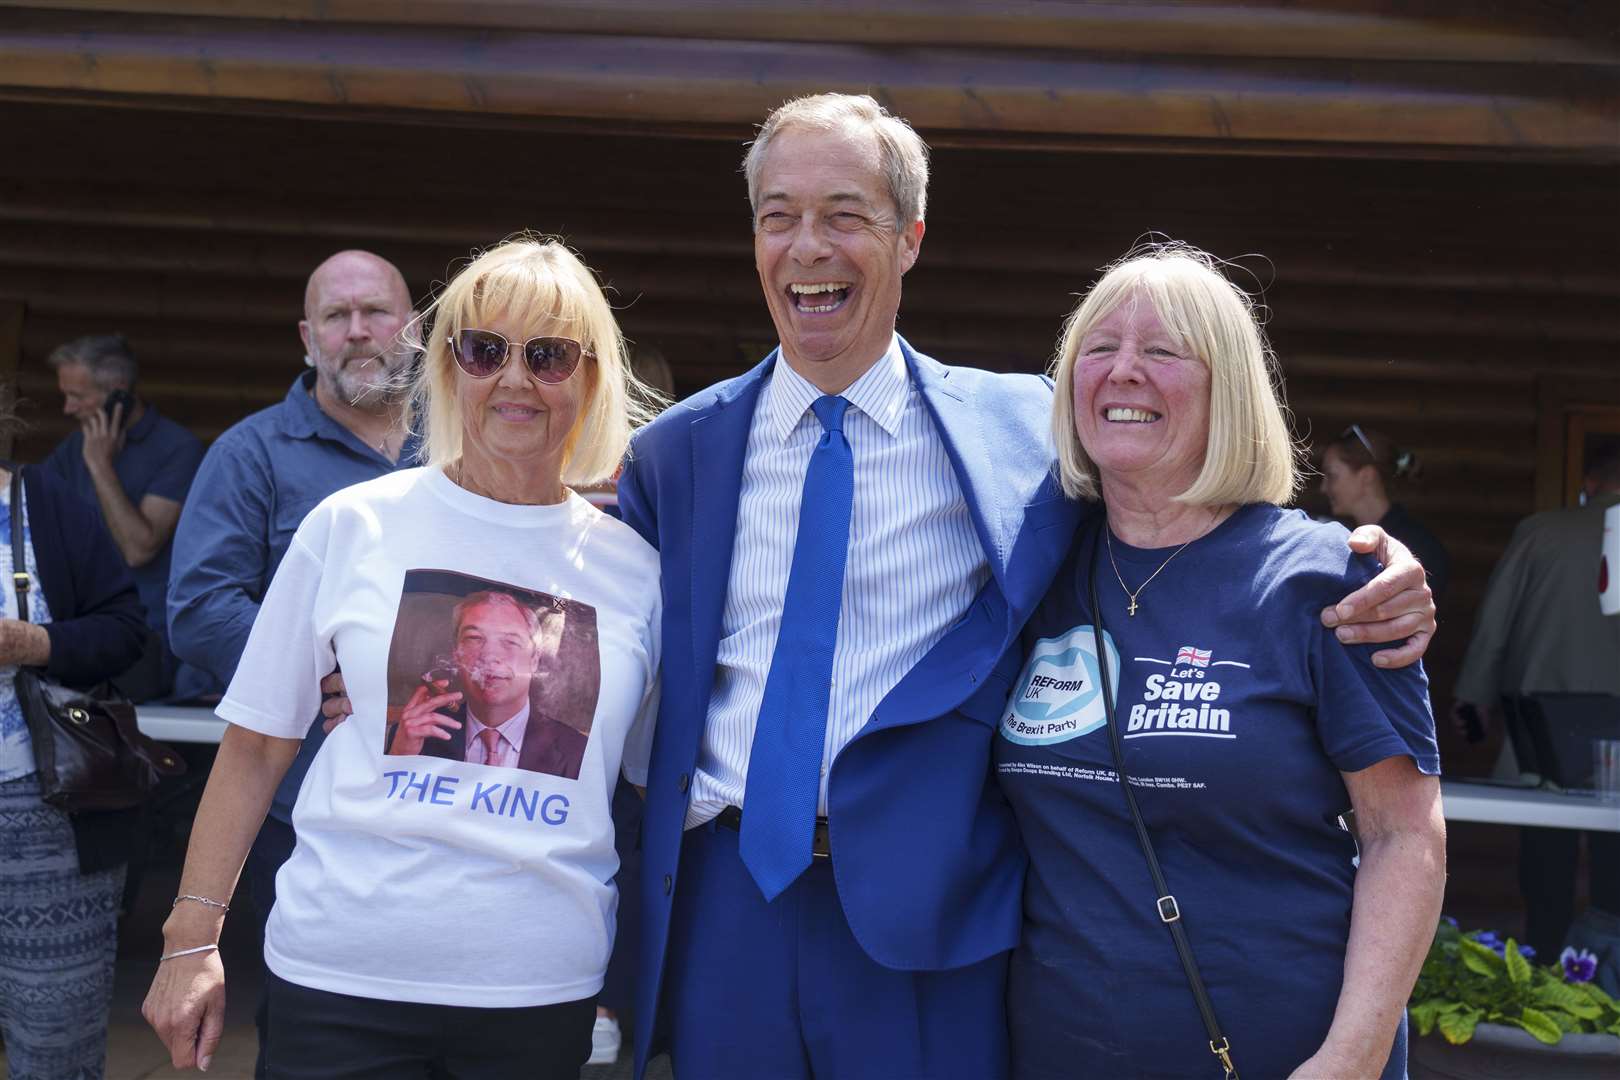 Nigel Farage ended the day posing with supporters as he visited Blackpool in the evening (Dominic Lipinski/PA)